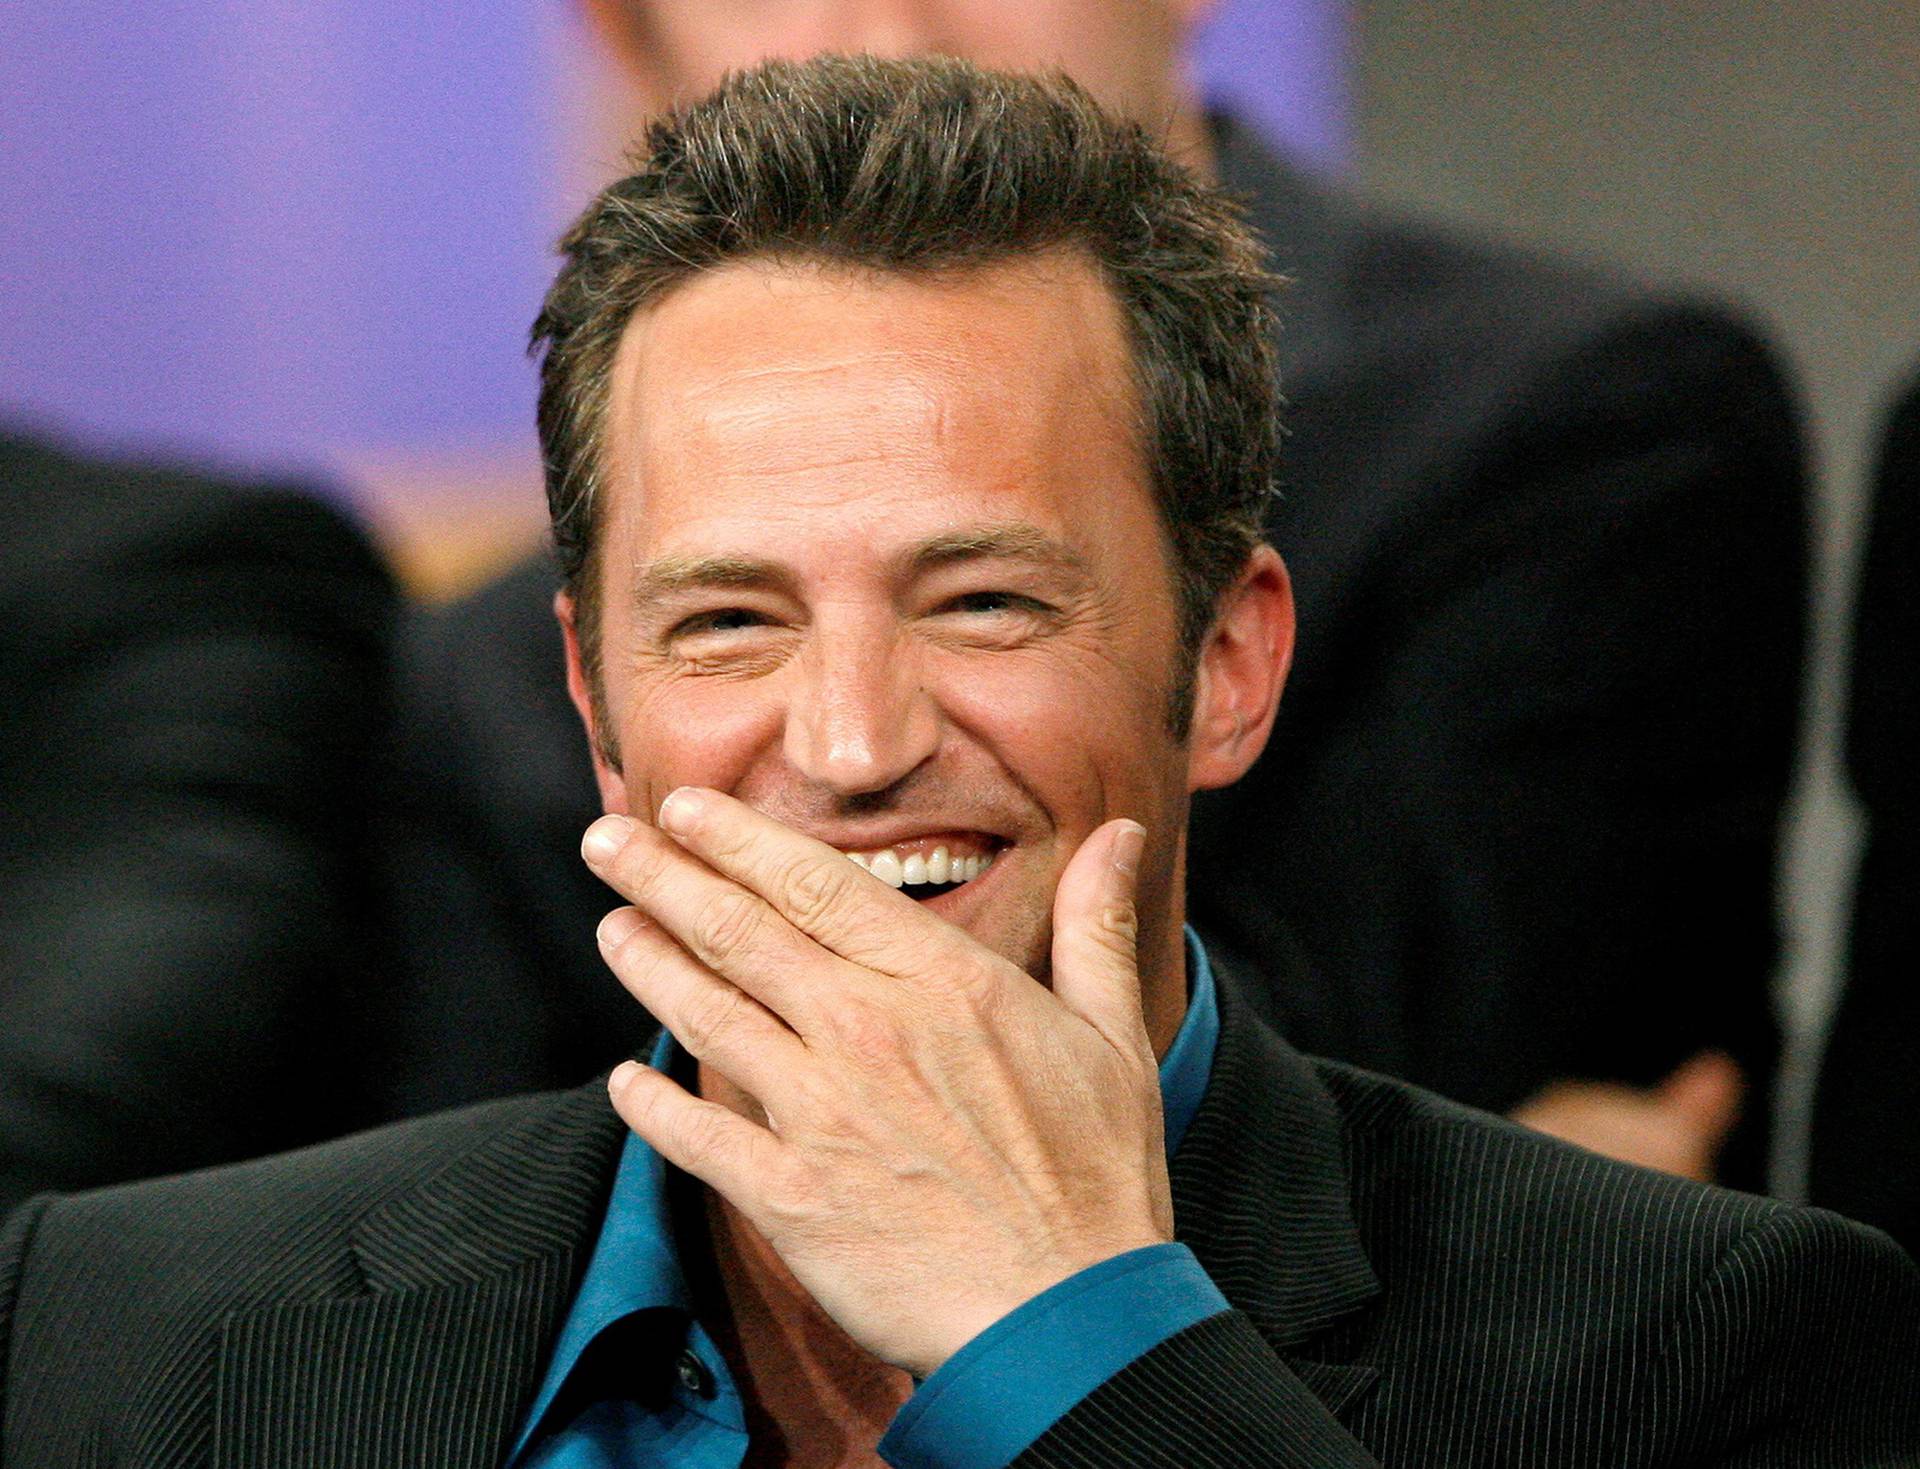 FILE PHOTO: Cast member Perry smiles at a panel at the Television Critics Association summer 2006 media tour in Pasadena